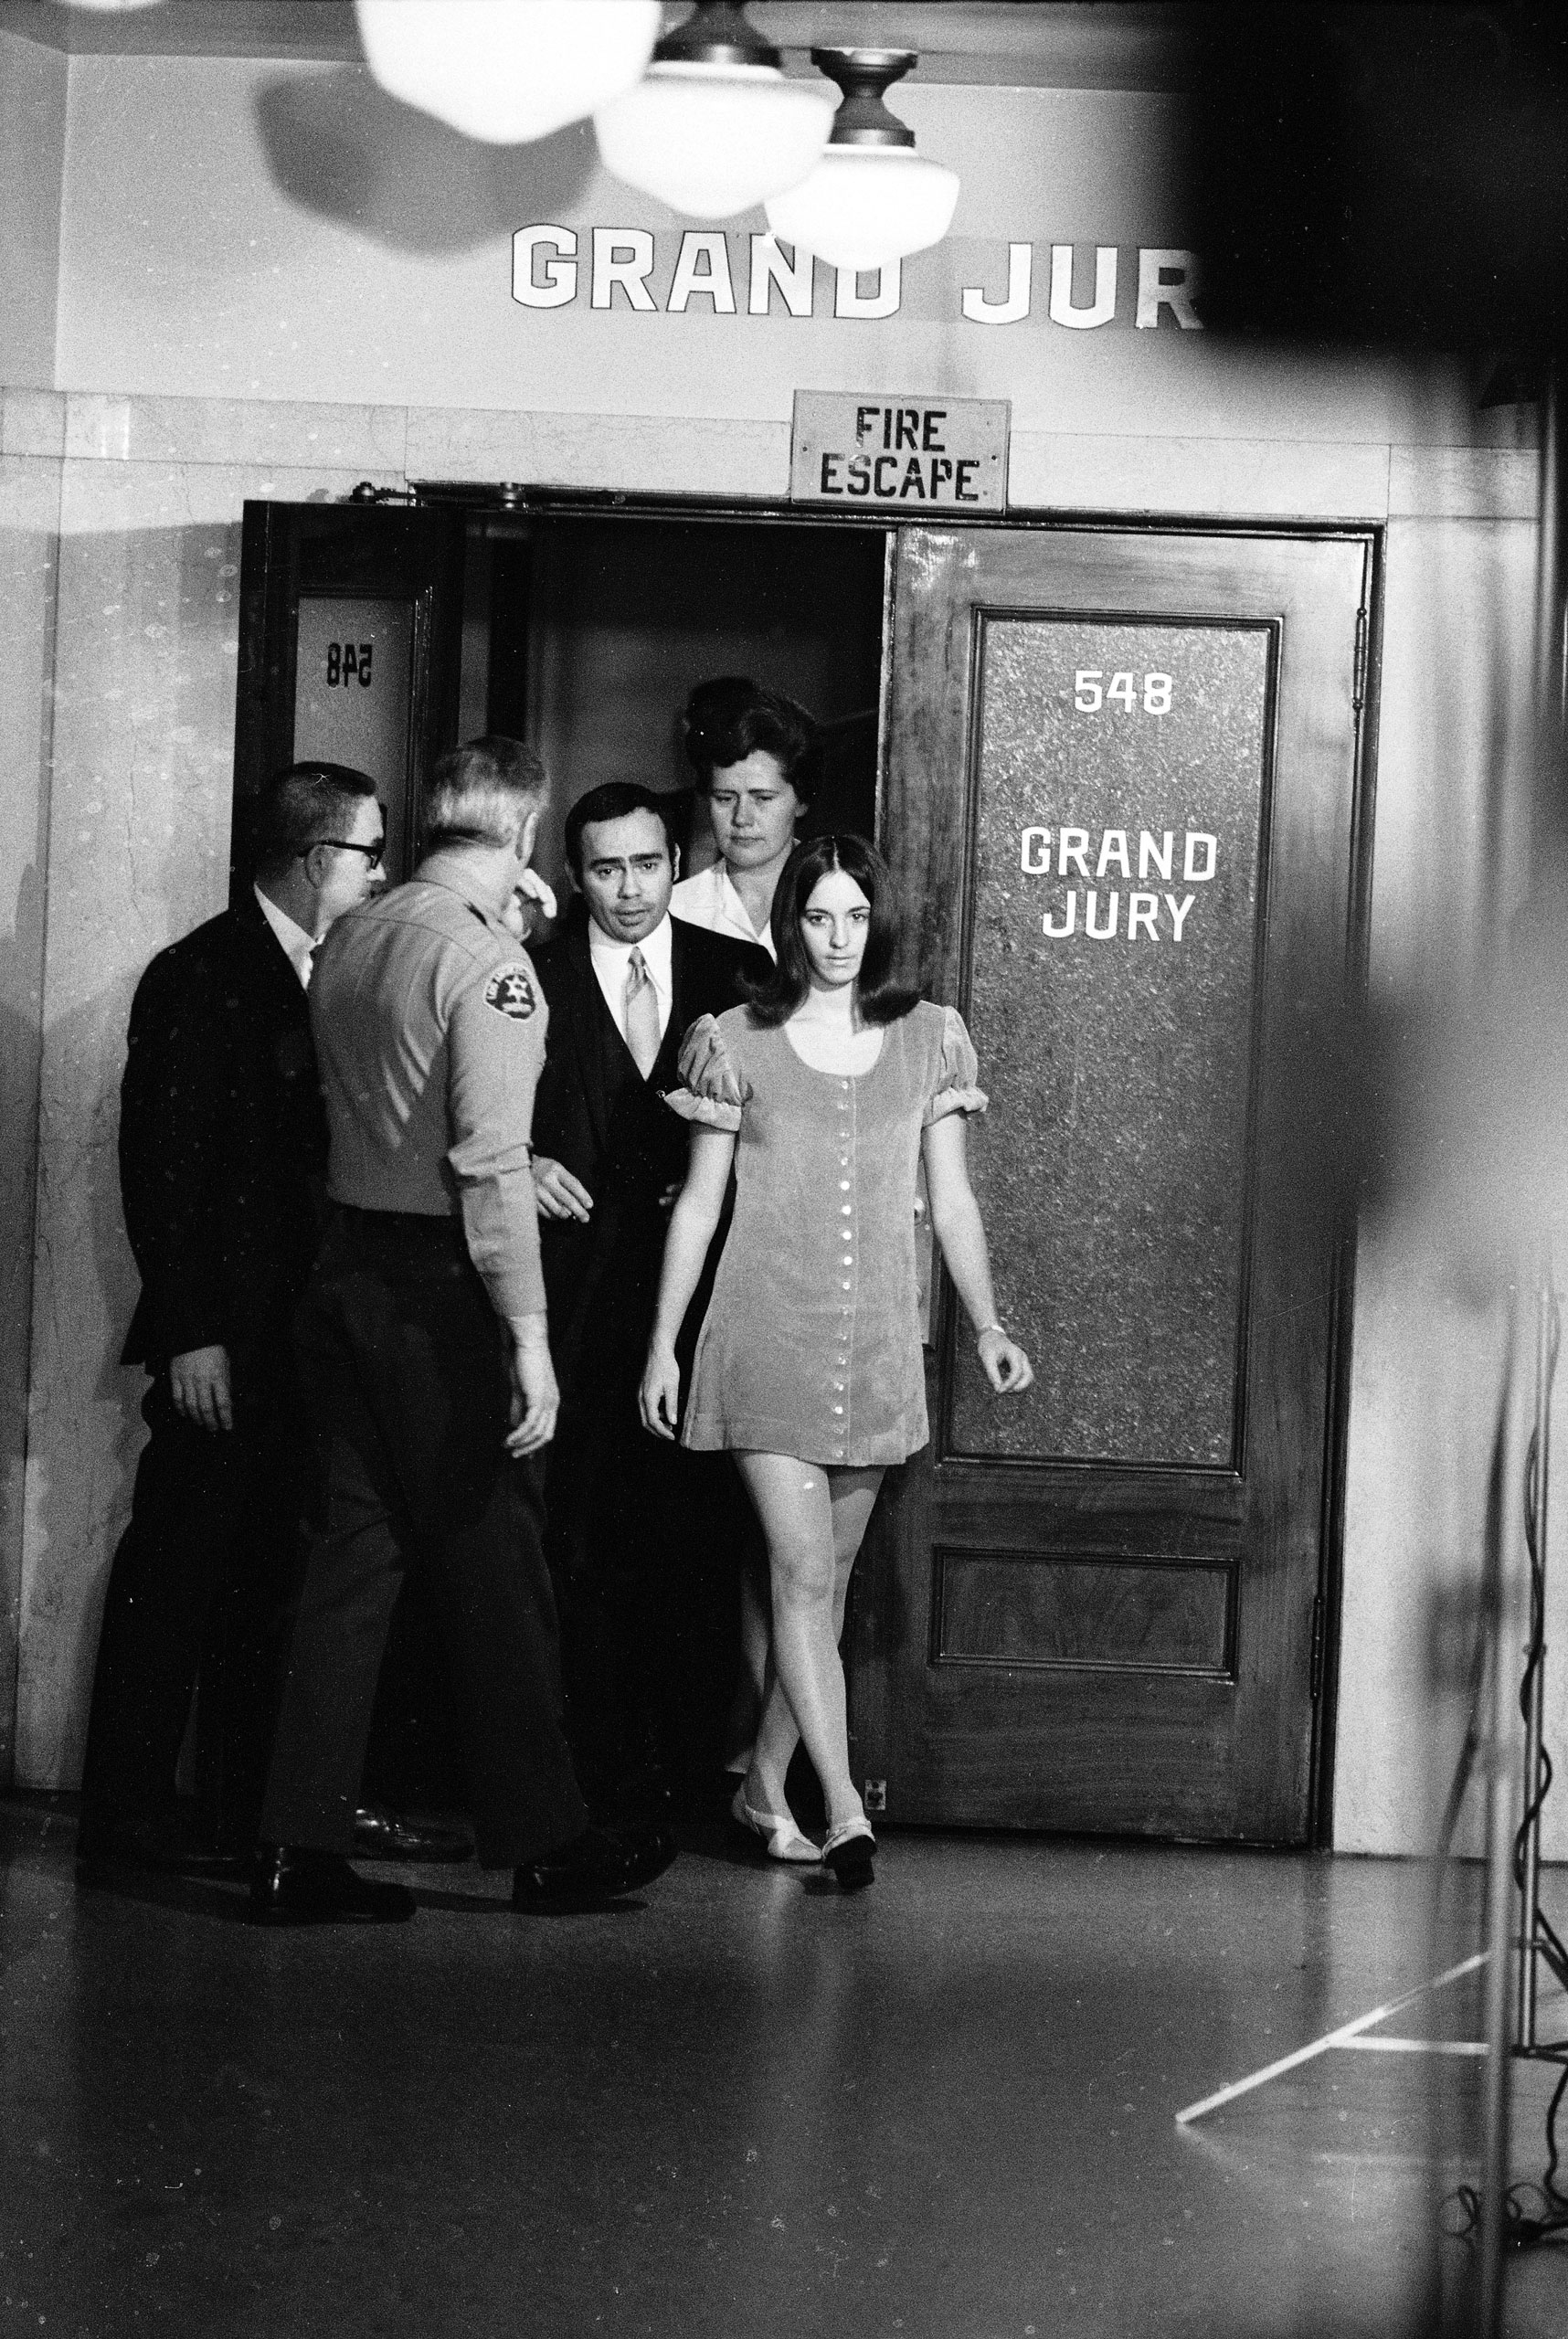 Manson Family member Susan Atkins leaves the Grand Jury room, Los Angeles Hall of Justice, December 1969.